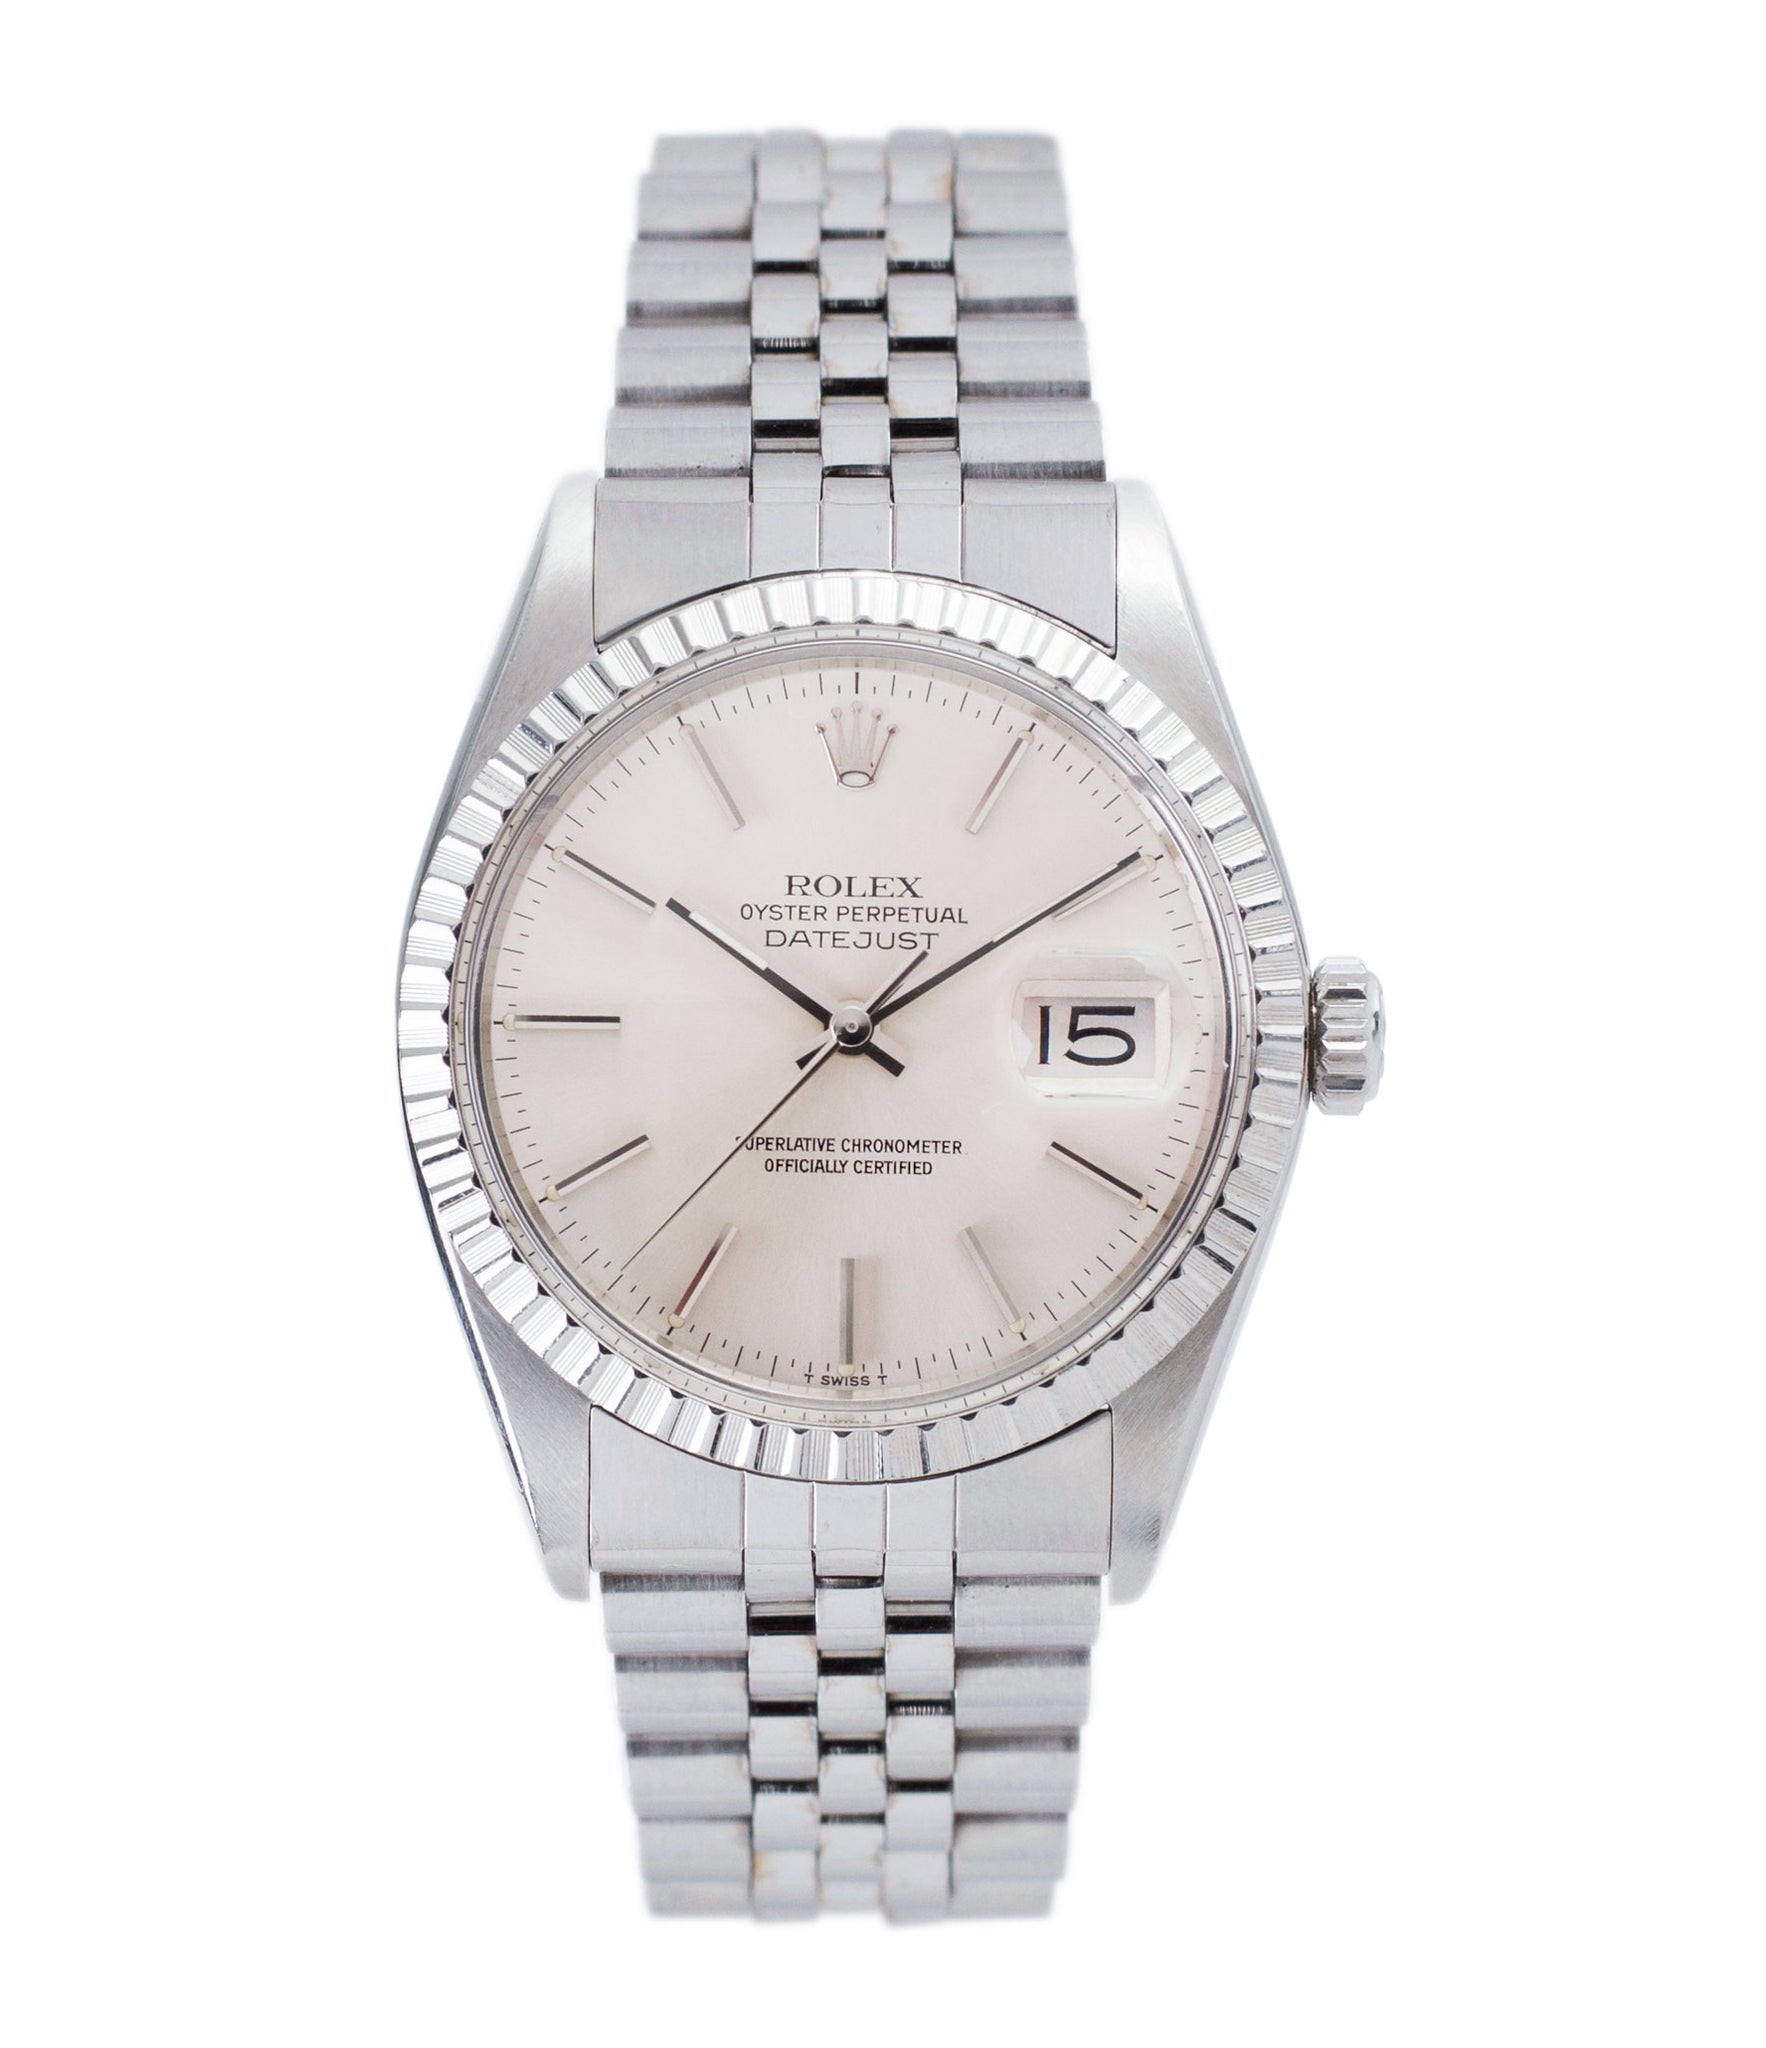 buy vintage full set Rolex Oyster Perpetual Datejust 16030 steel automatic silver dial watch Jubilee bracelet for sale online at A Collected Man London UK vintage watch specialist